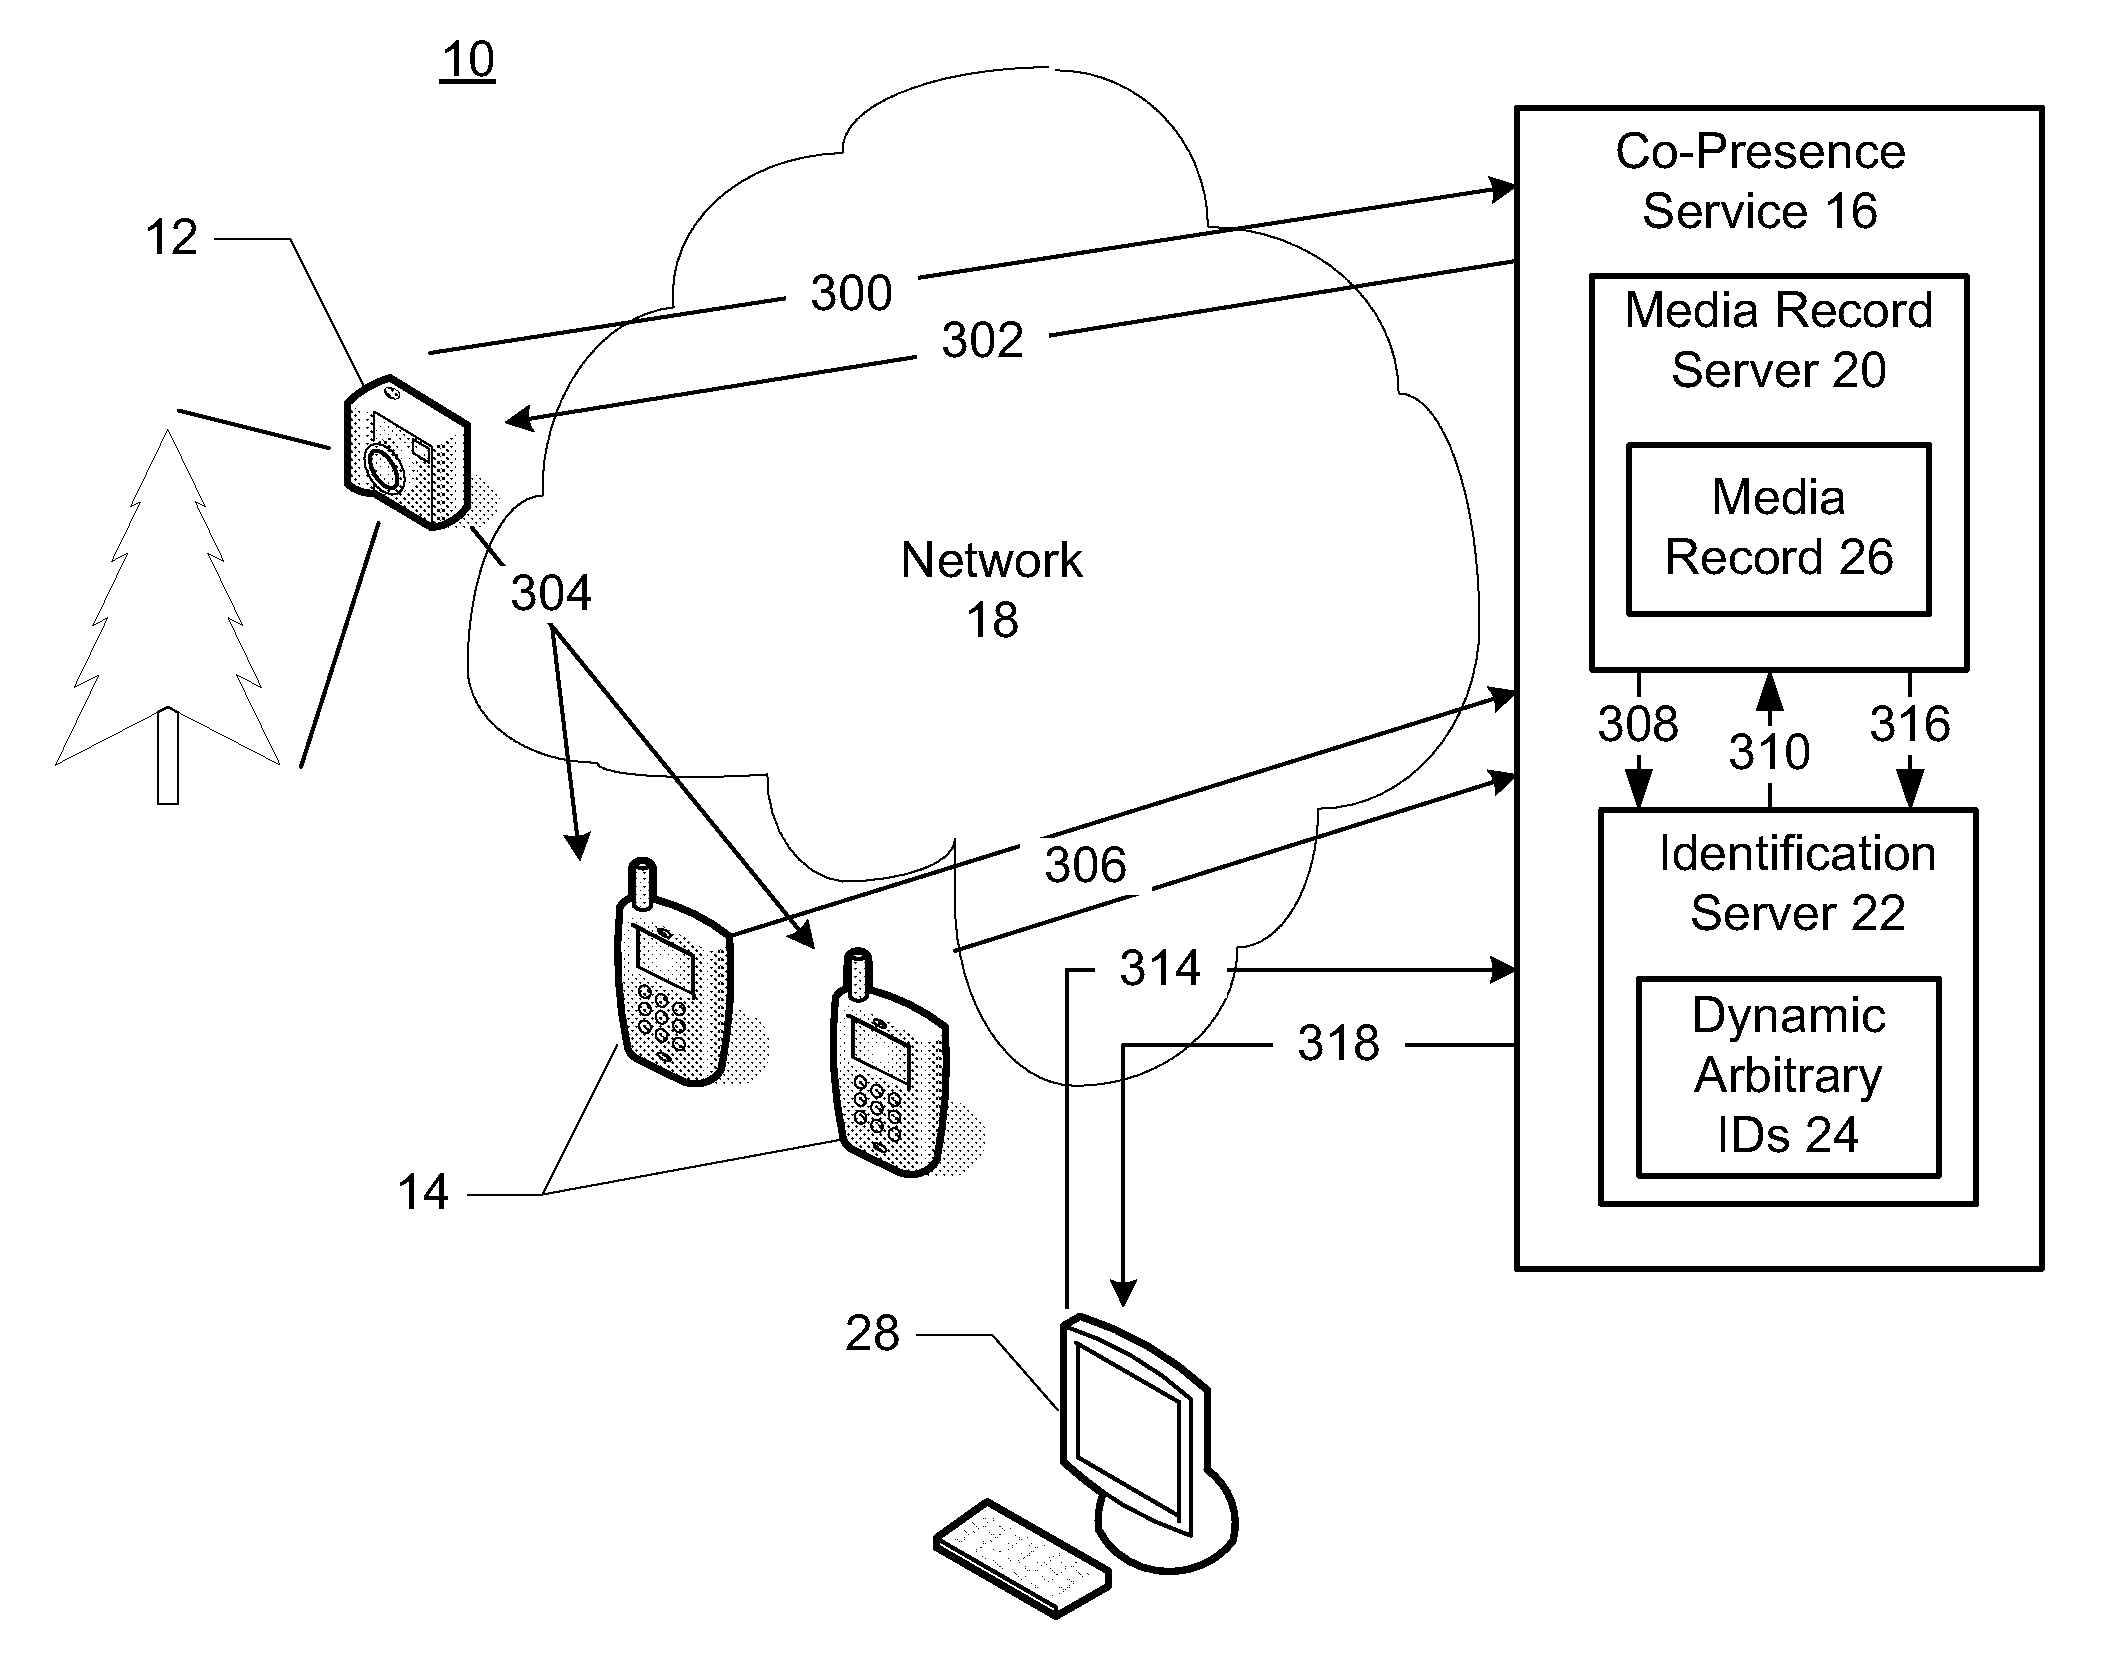 Method and system for associating co-presence information with a media item